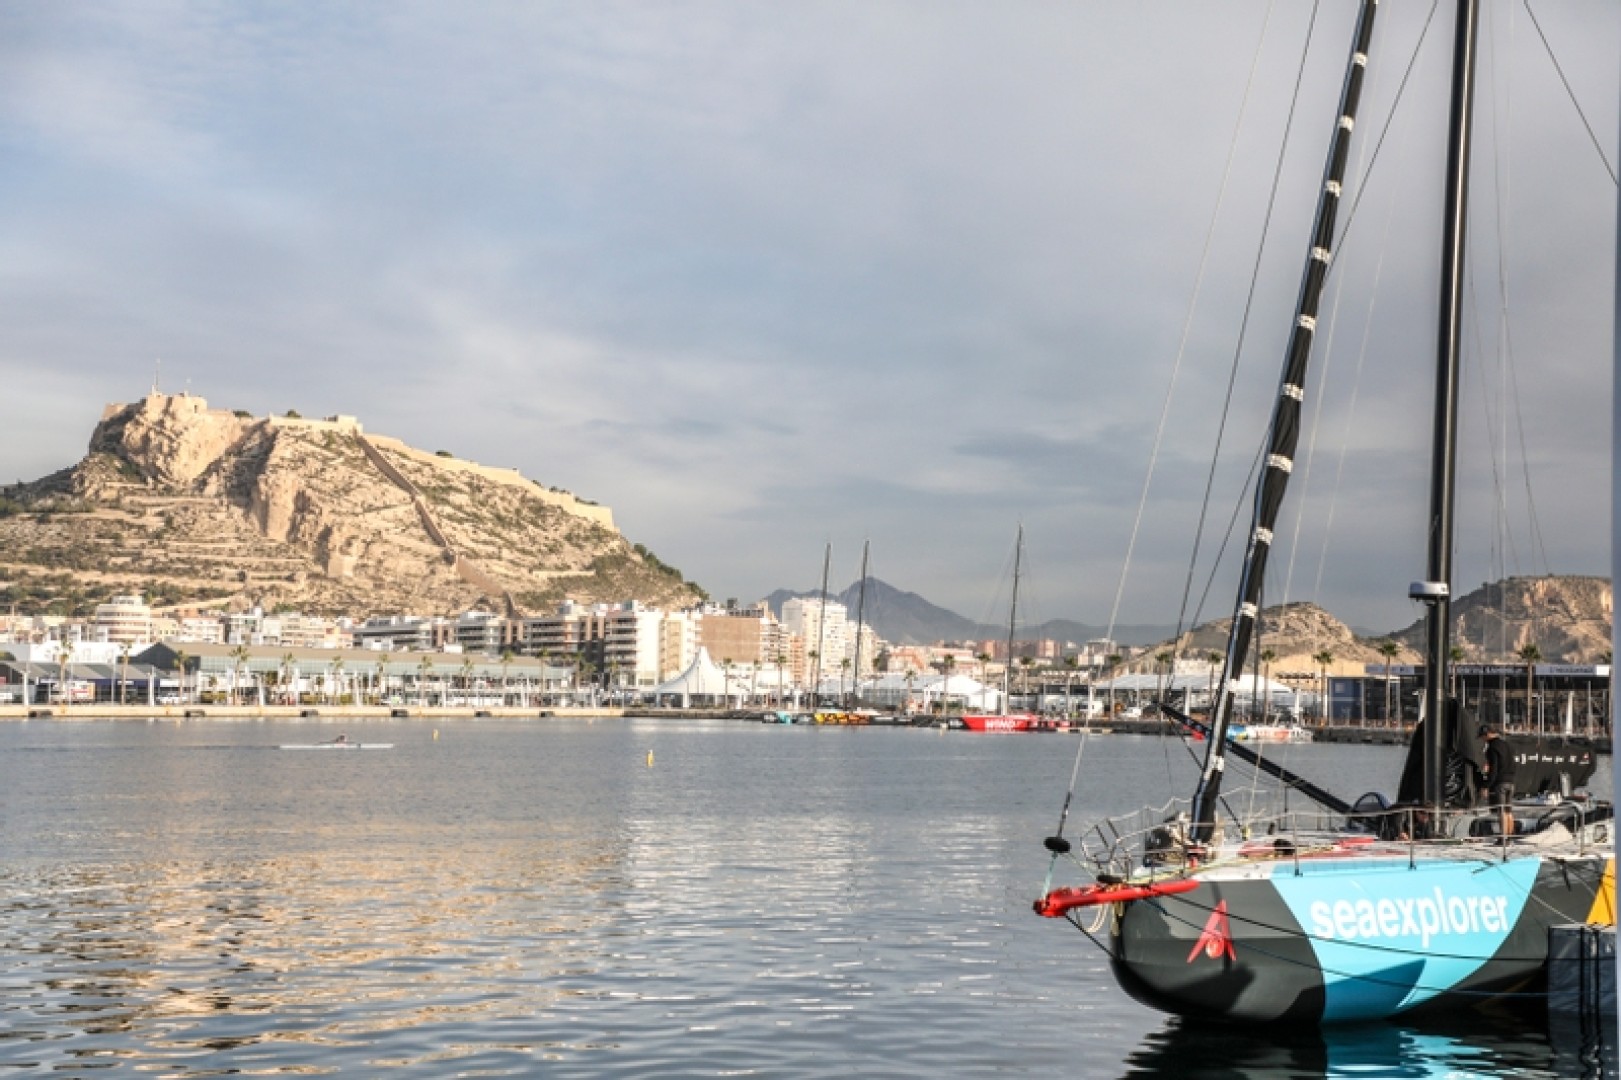 Teams get ready for The Ocean Race 2022-23 in Alicante
© Carlota Alonso